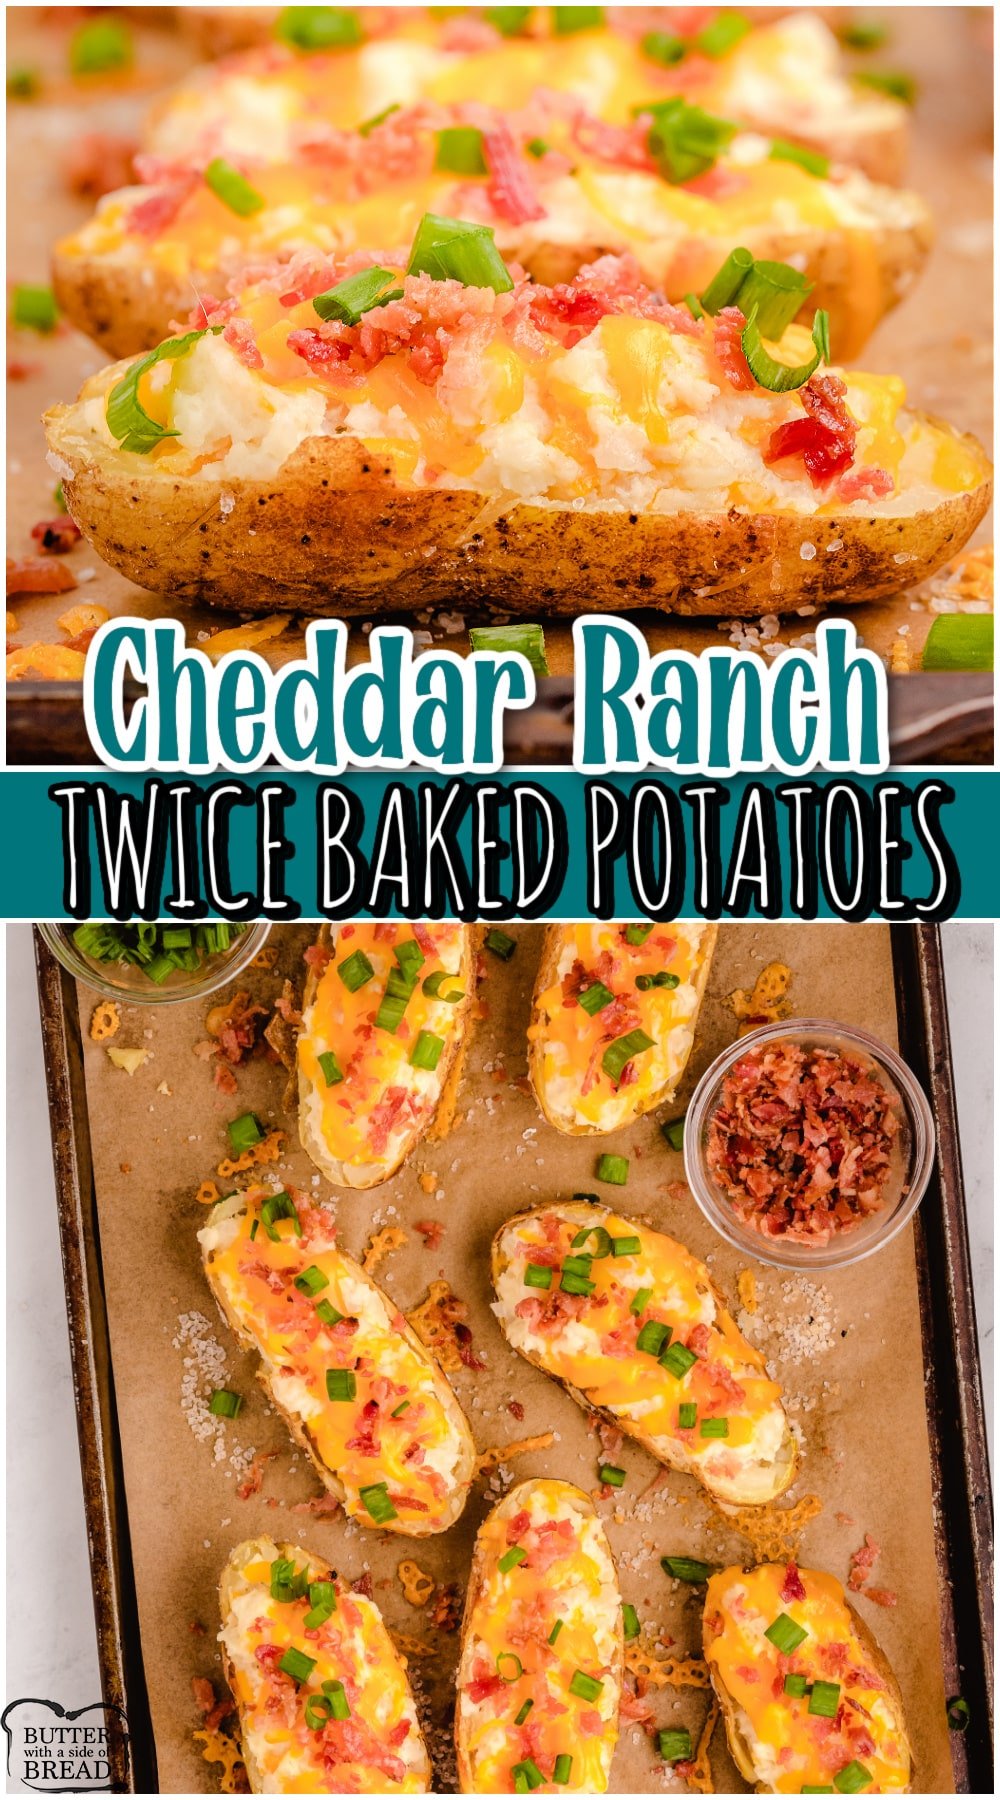 Cheddar Ranch Twice-Baked Potatoes are cheesy, flavorful variation on twice baked potatoes! Change up your favorite potato side dish with this simple twist!